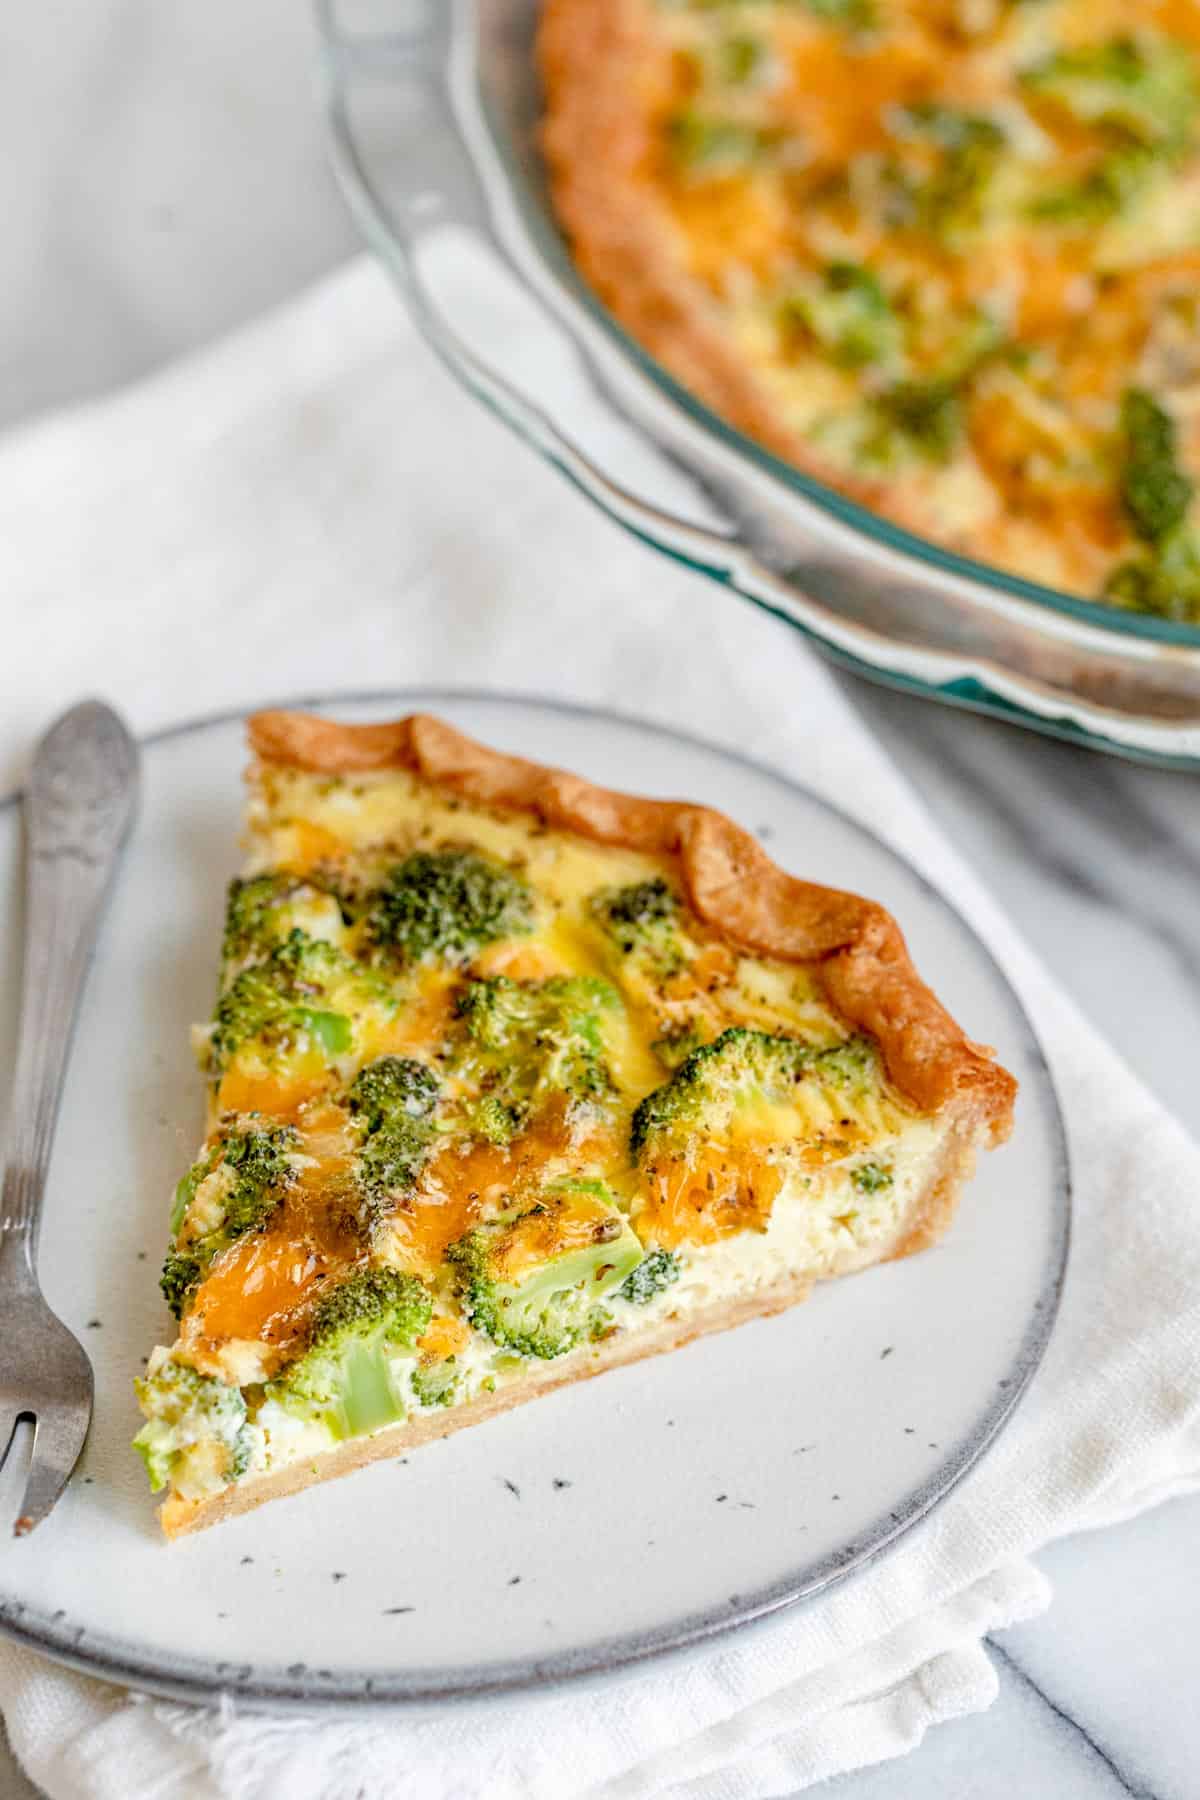 Angled view of the broccoli and cheese quiche to show the texture